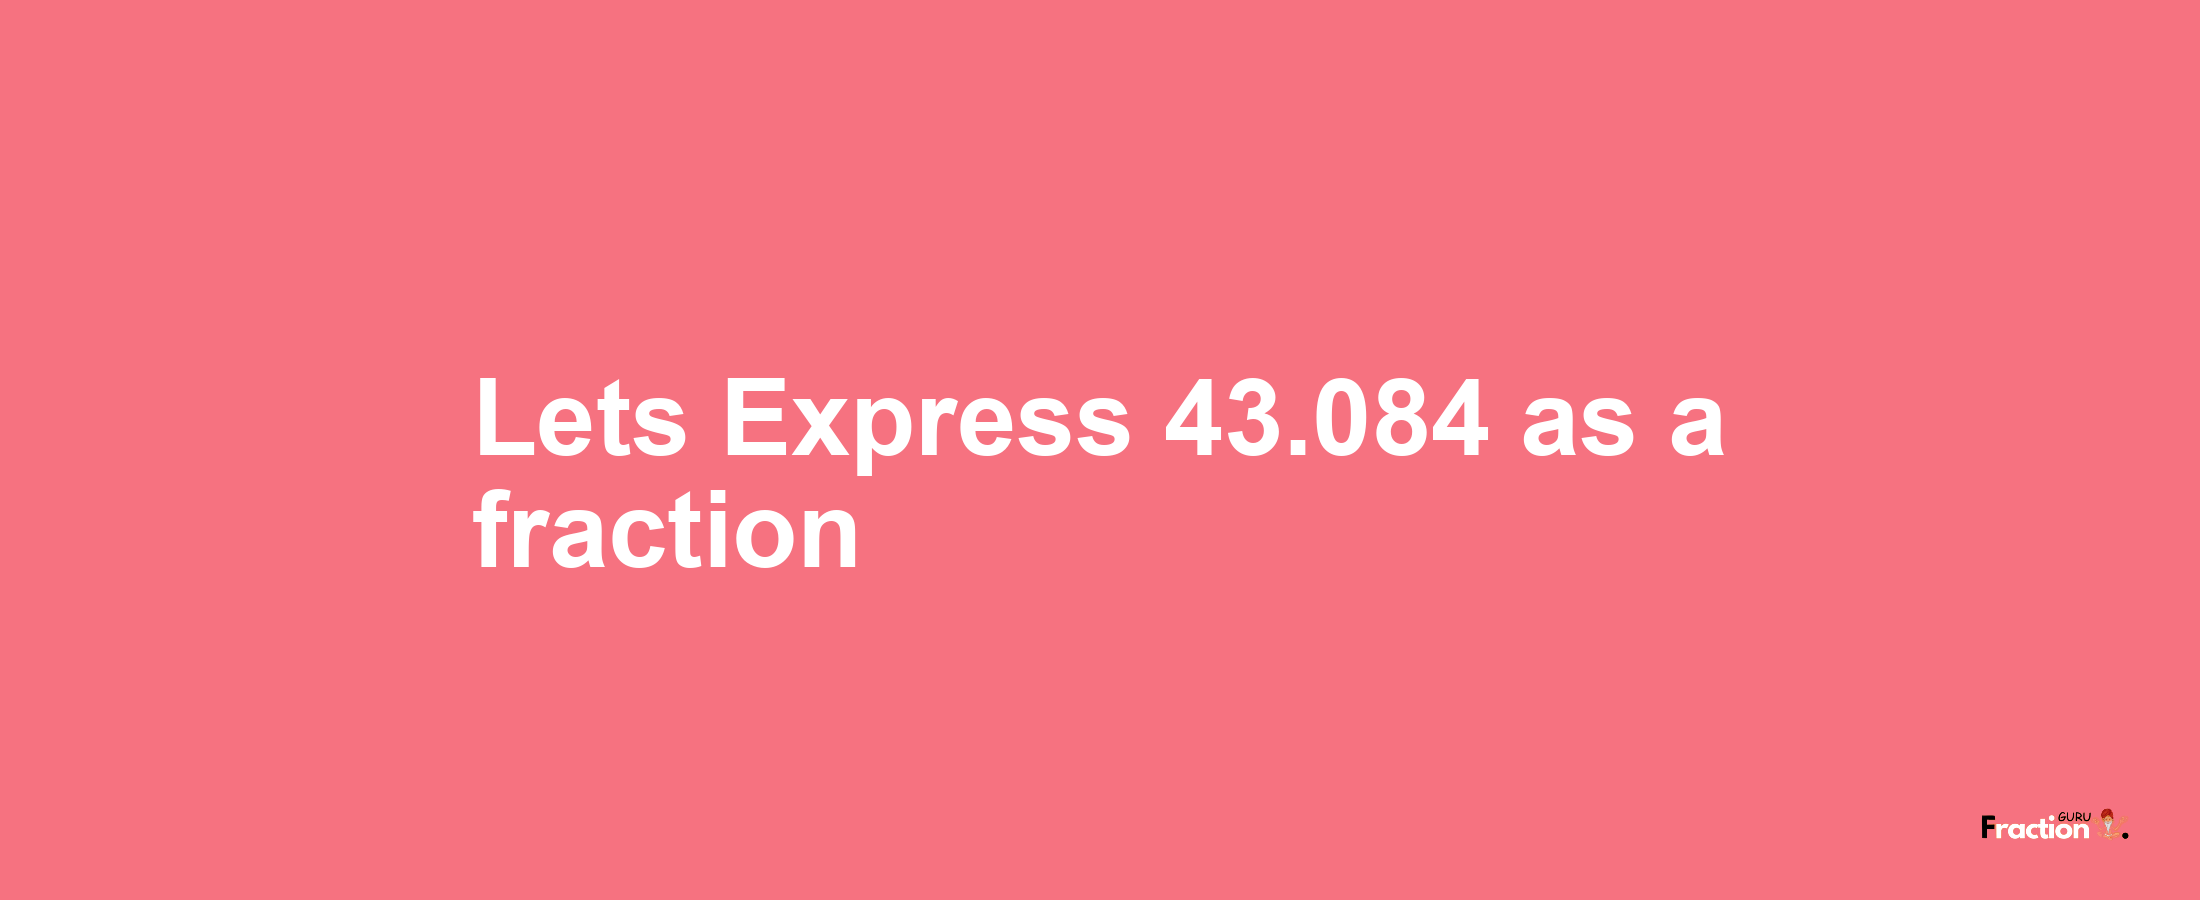 Lets Express 43.084 as afraction